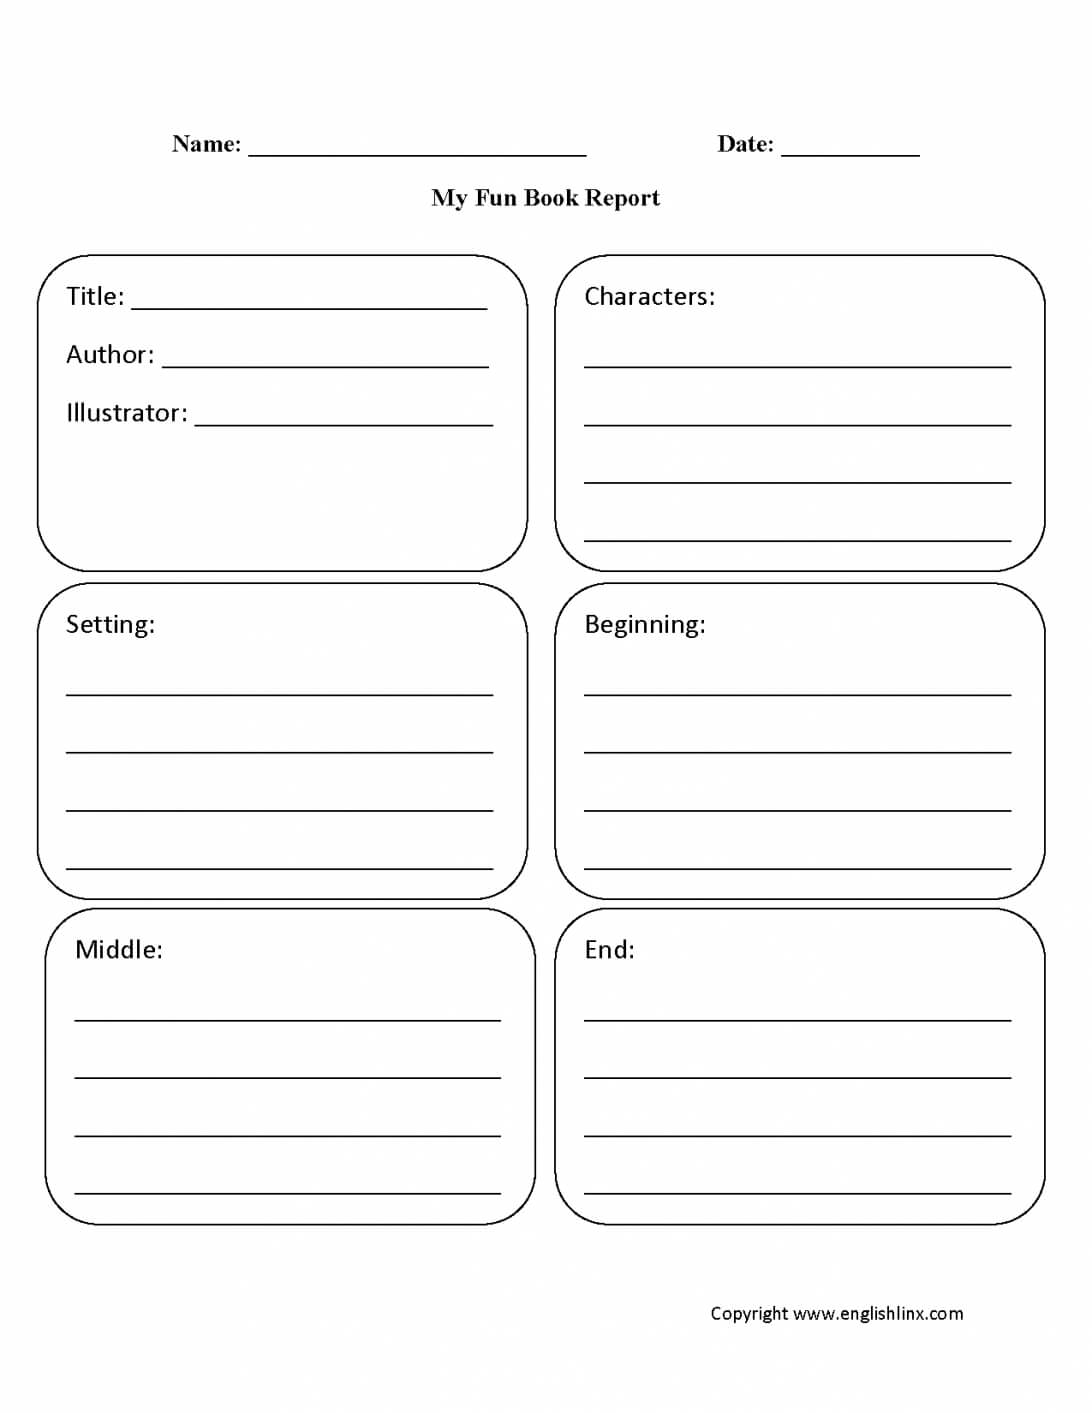 Book Report Template 011 Biography Ideas My Formidable High In Biography Book Report Template